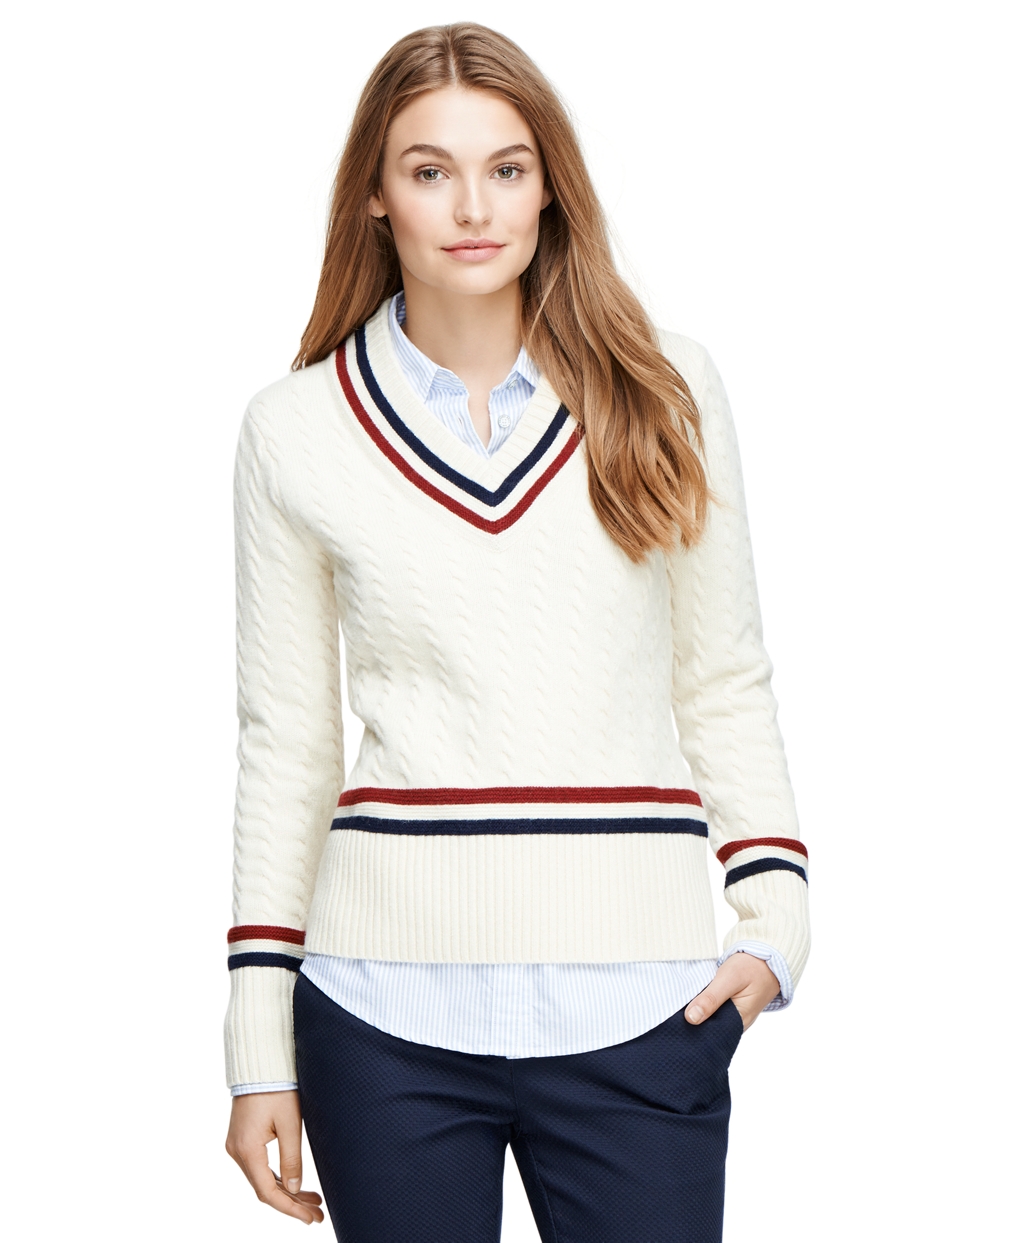 Are There Any Adorable Preppy Sweaters? – Telegraph